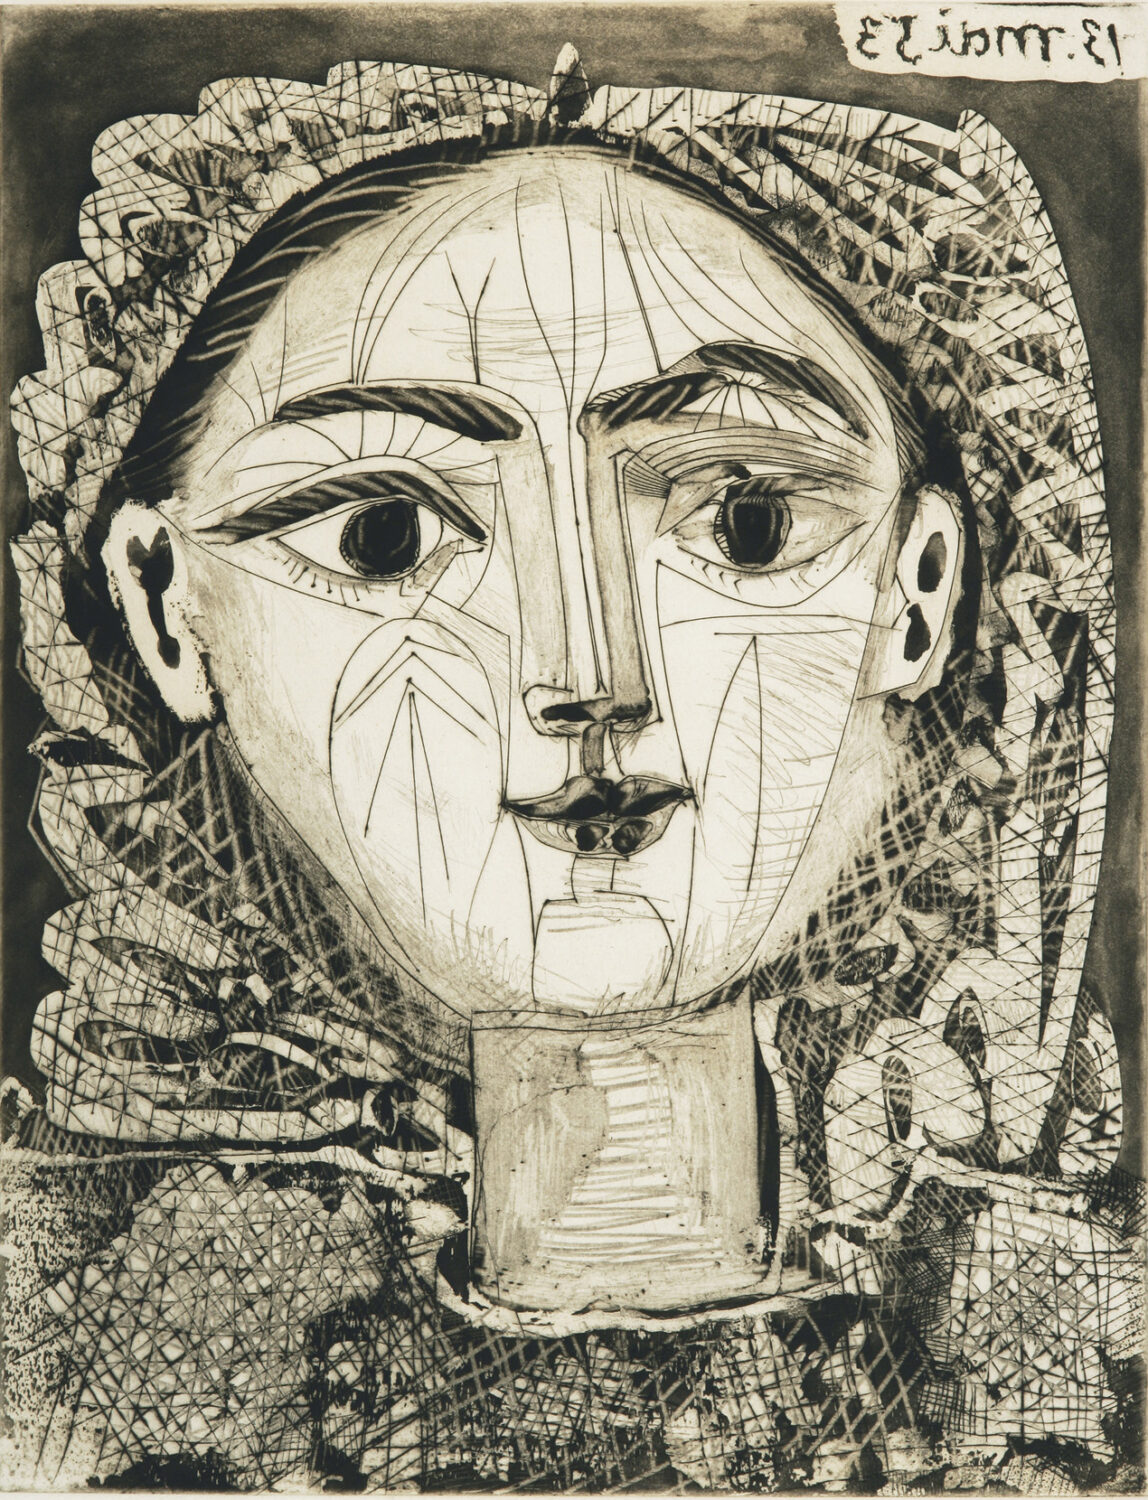 thumbnail of Aquatinit, etching drypoint and scraper by Pablo Picasso titled Portrait de Francoise a la Resille.